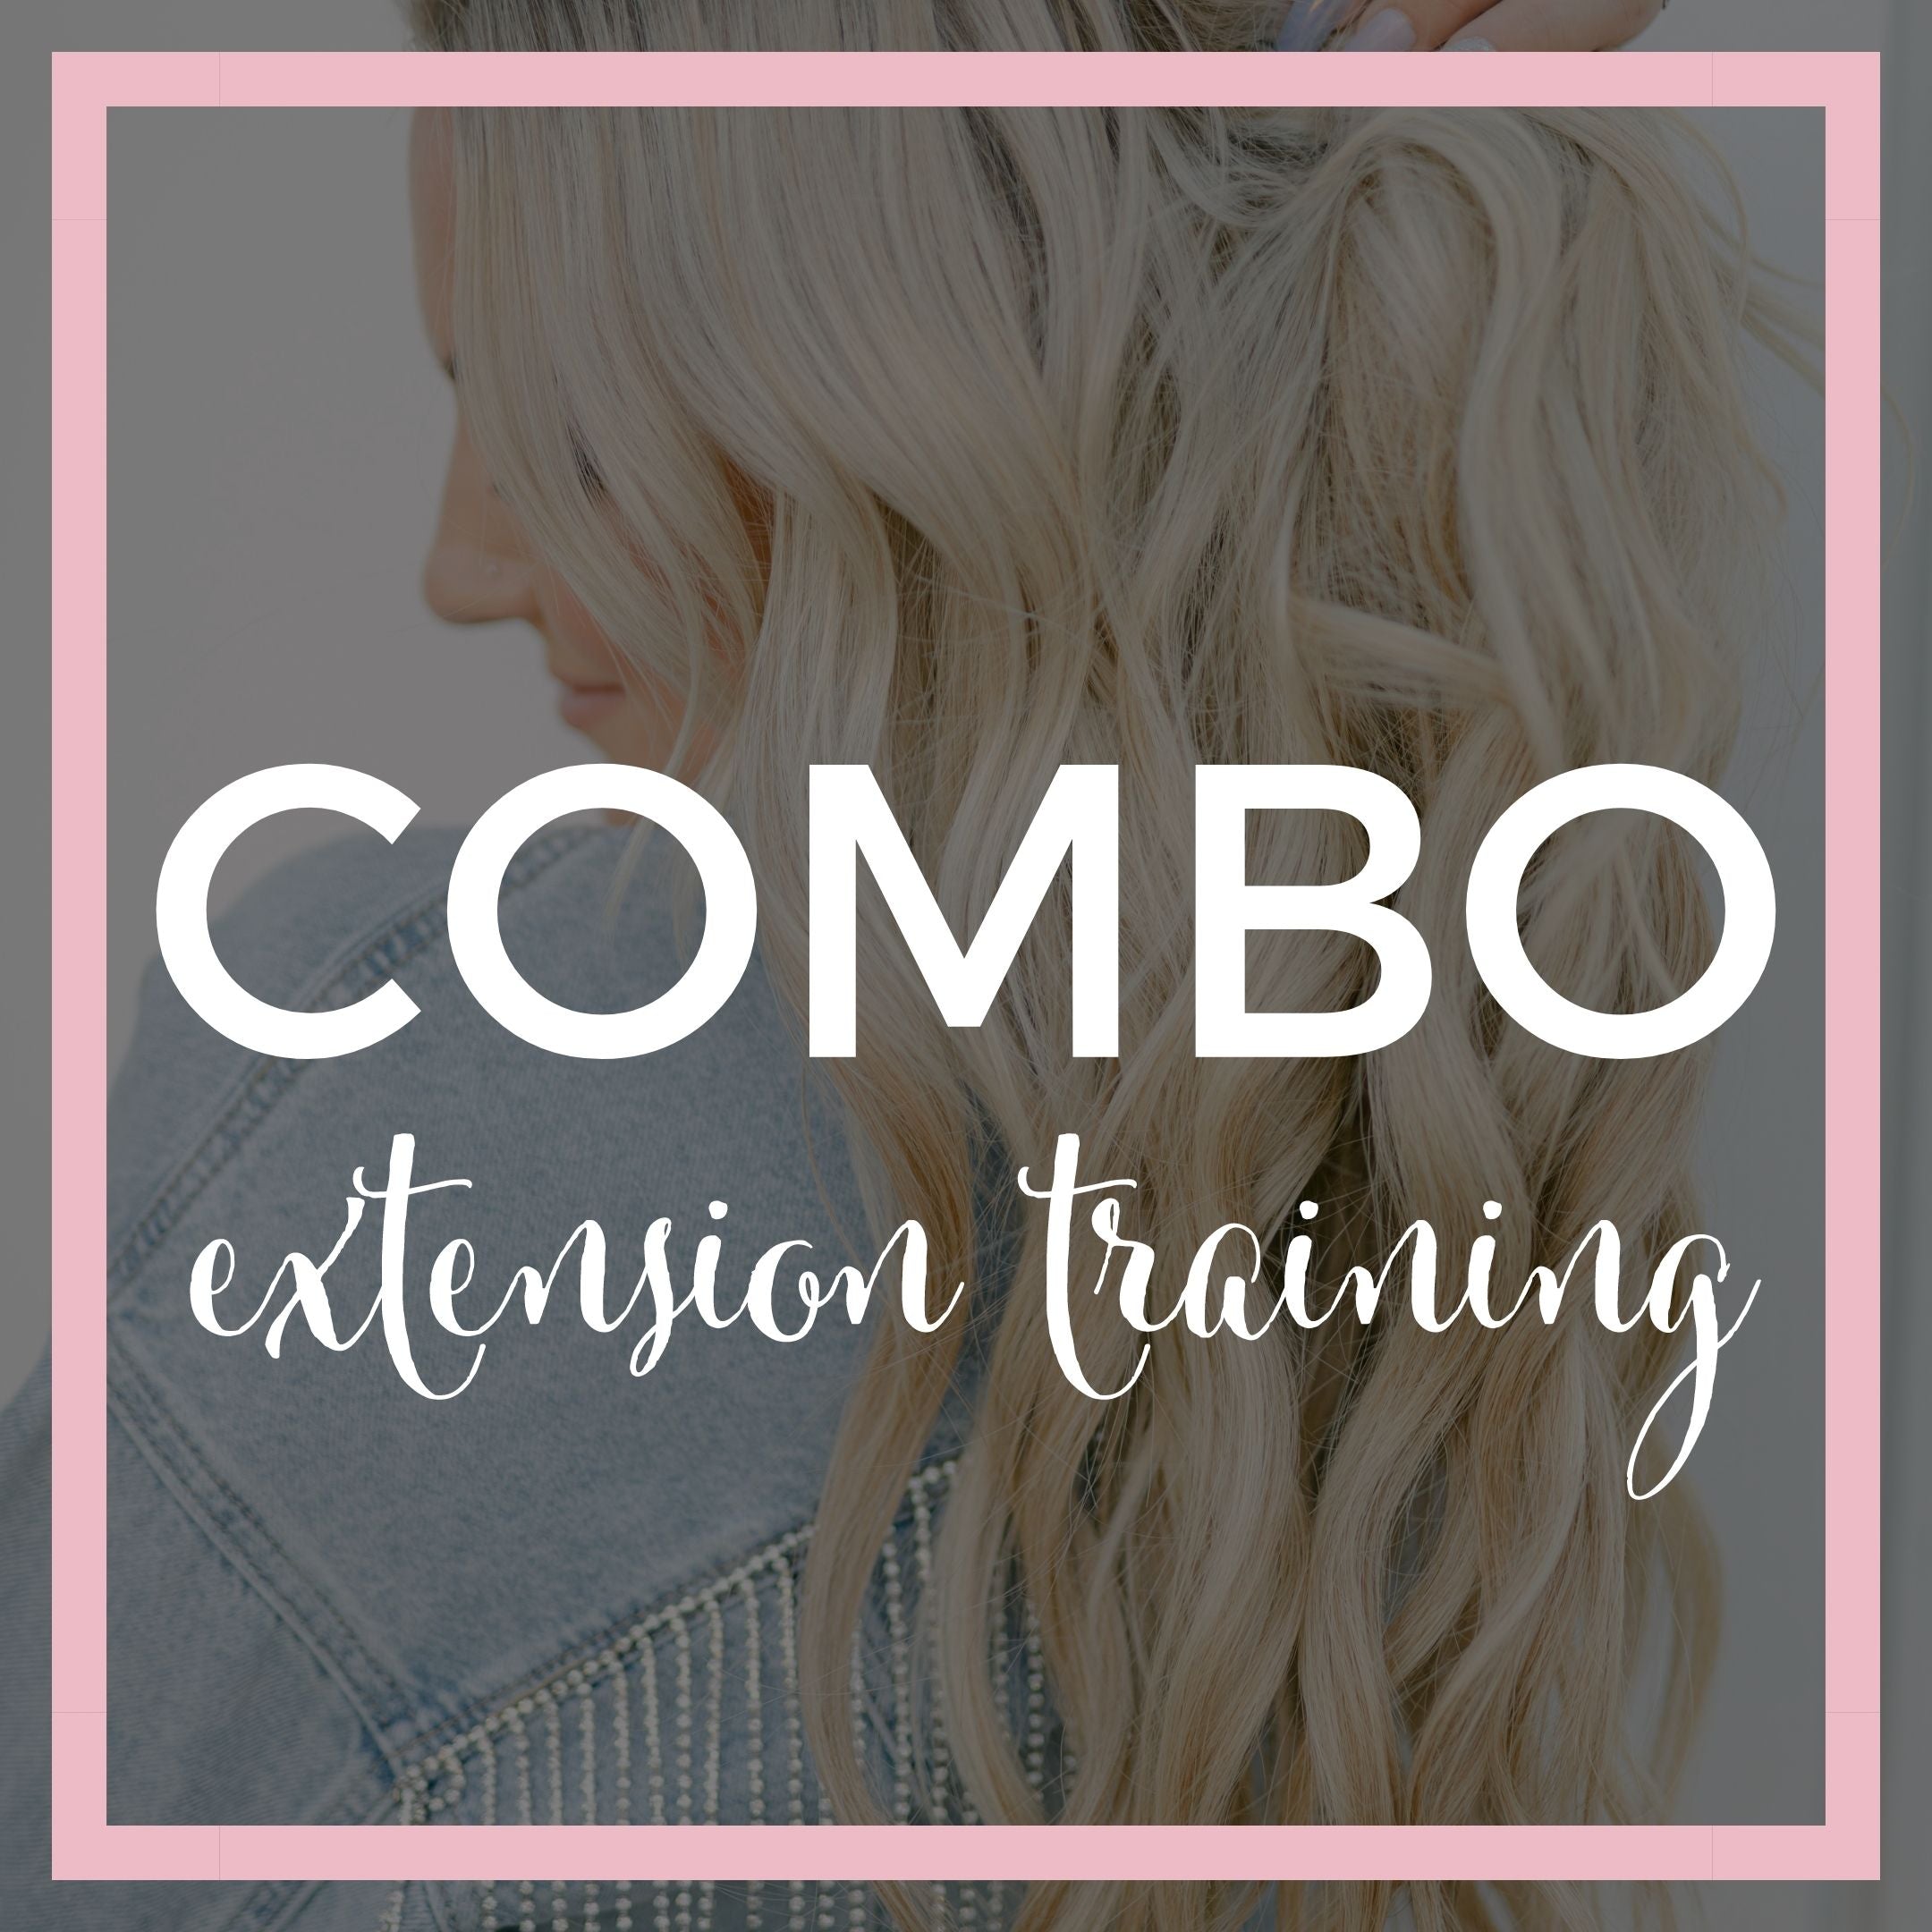 COMBO Hair Extension Training